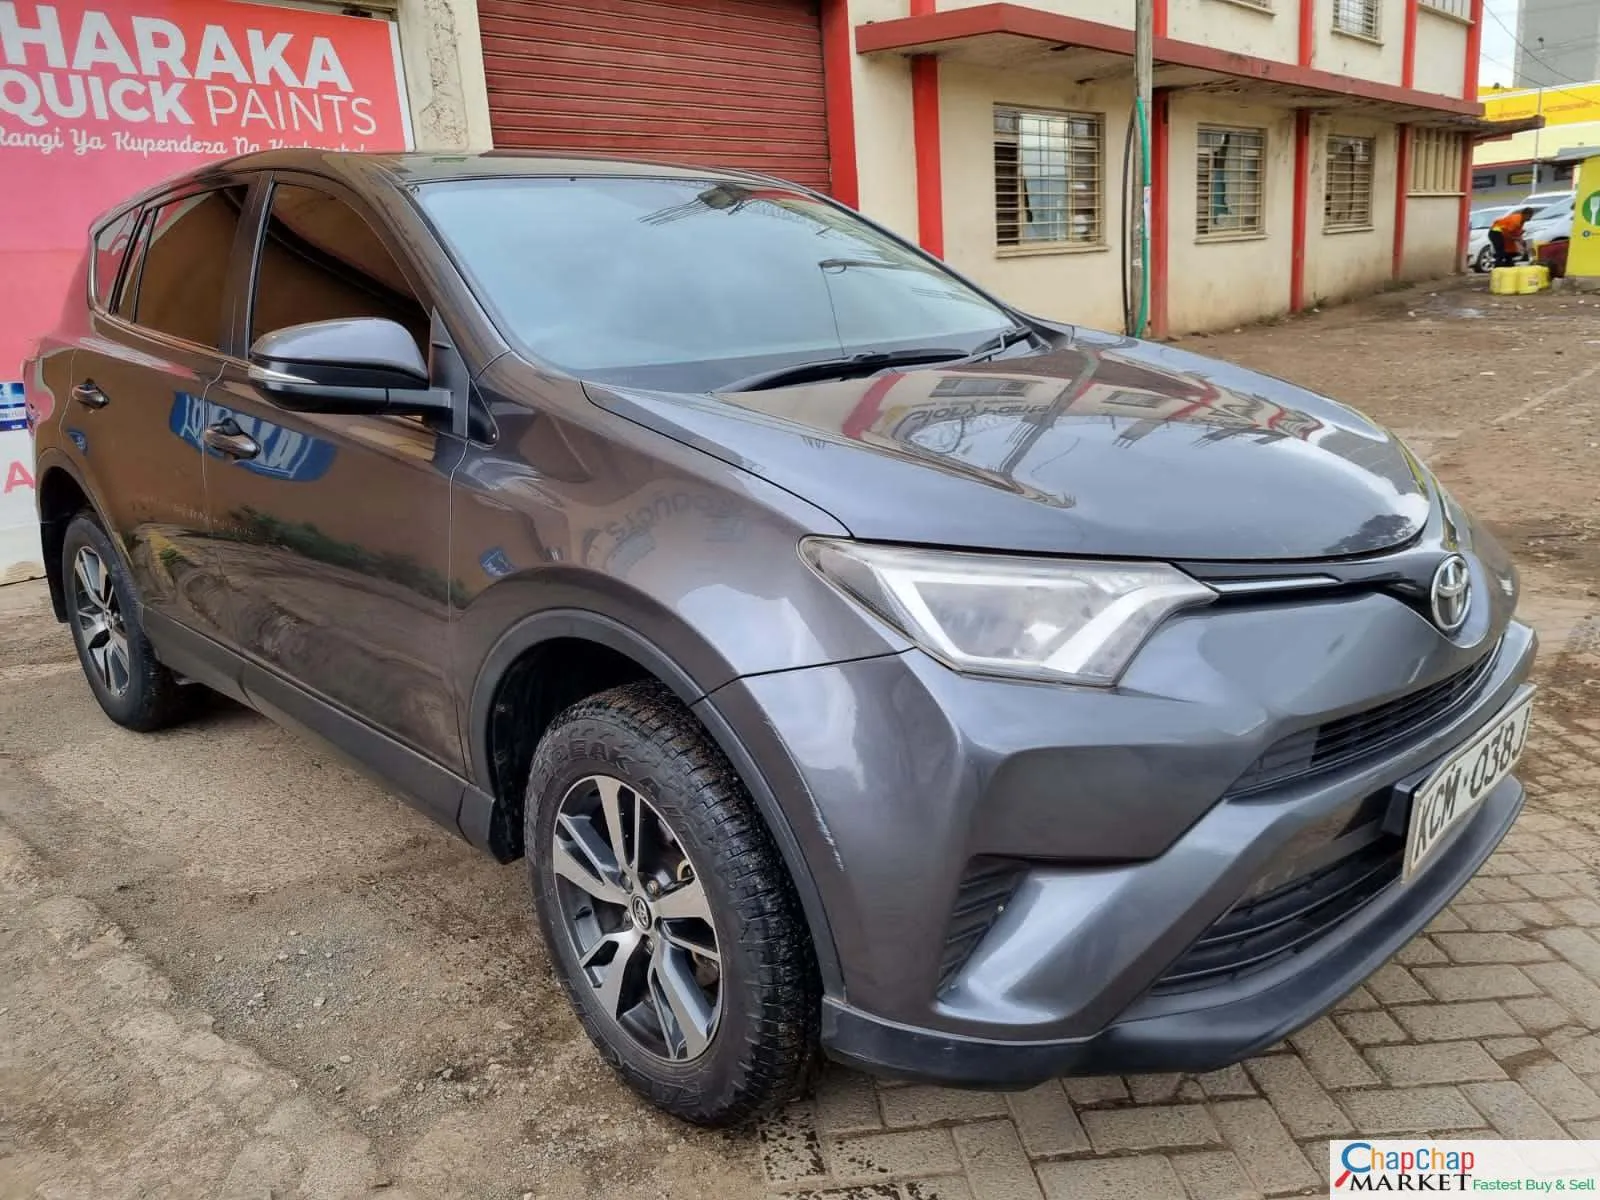 Toyota RAV4 kenya new shape local assembly You Pay 30% Deposit Trade in OK Toyota RAV4 for sale in kenya hire purchase installments EXCLUSIVE